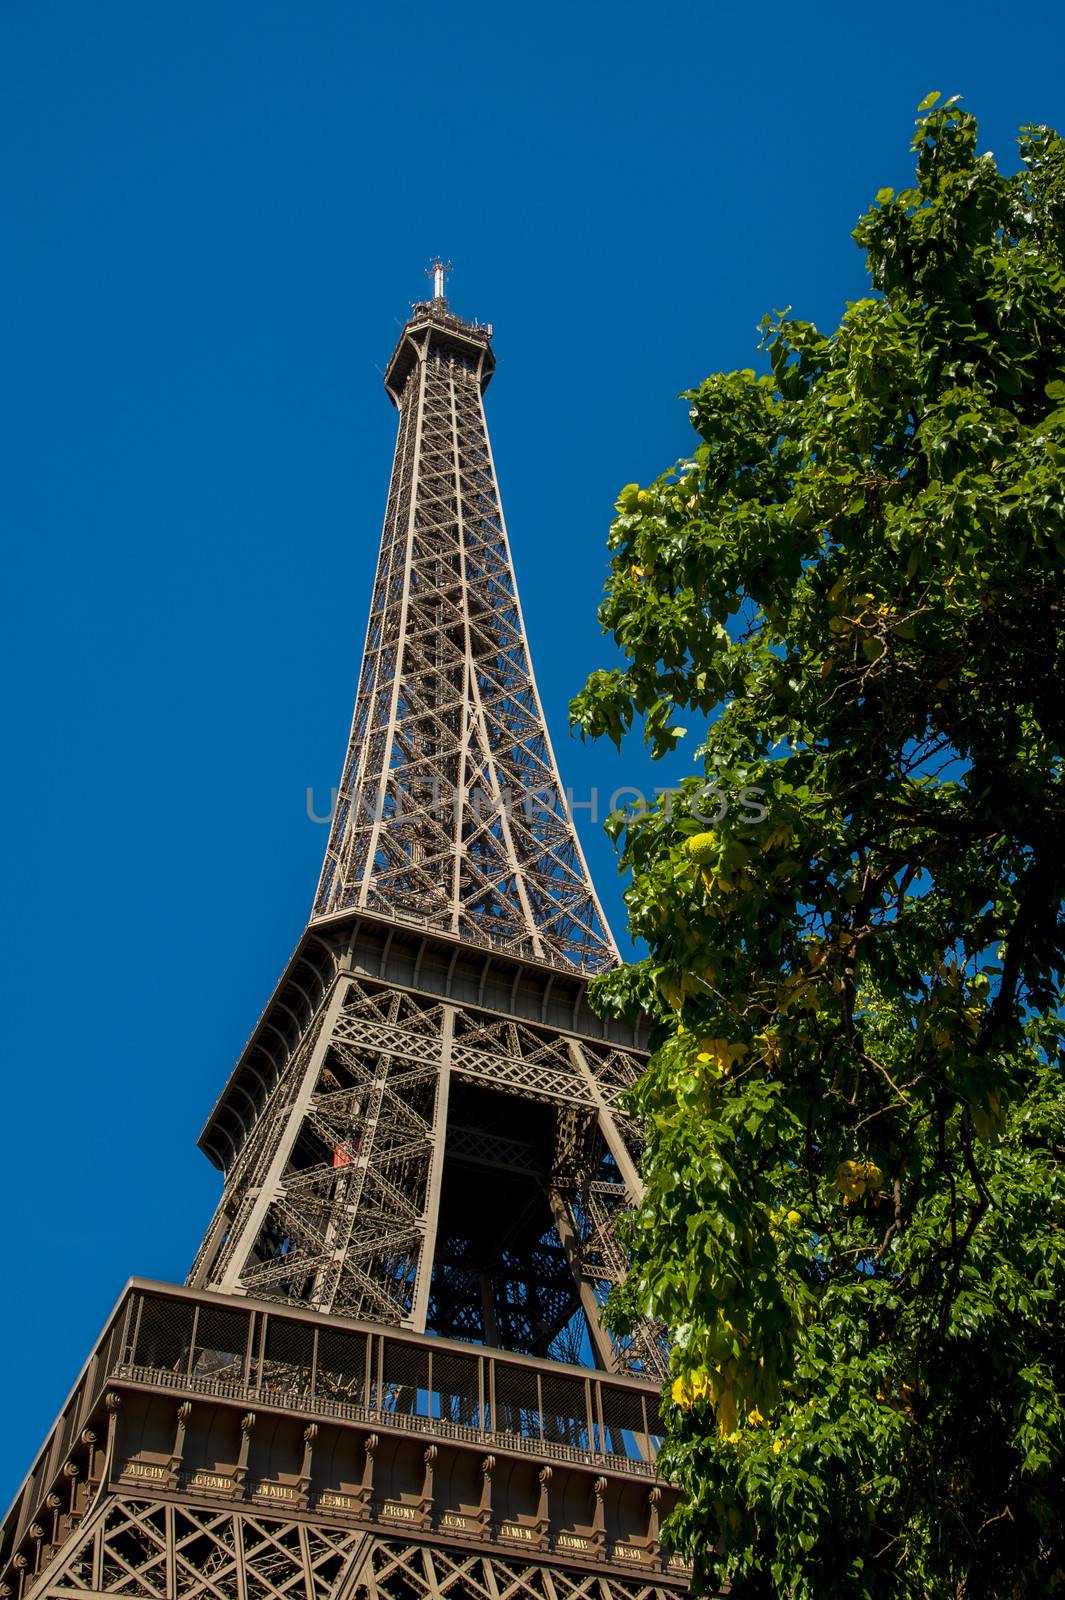 Image of the Tour Eiffel in Paris with a plant